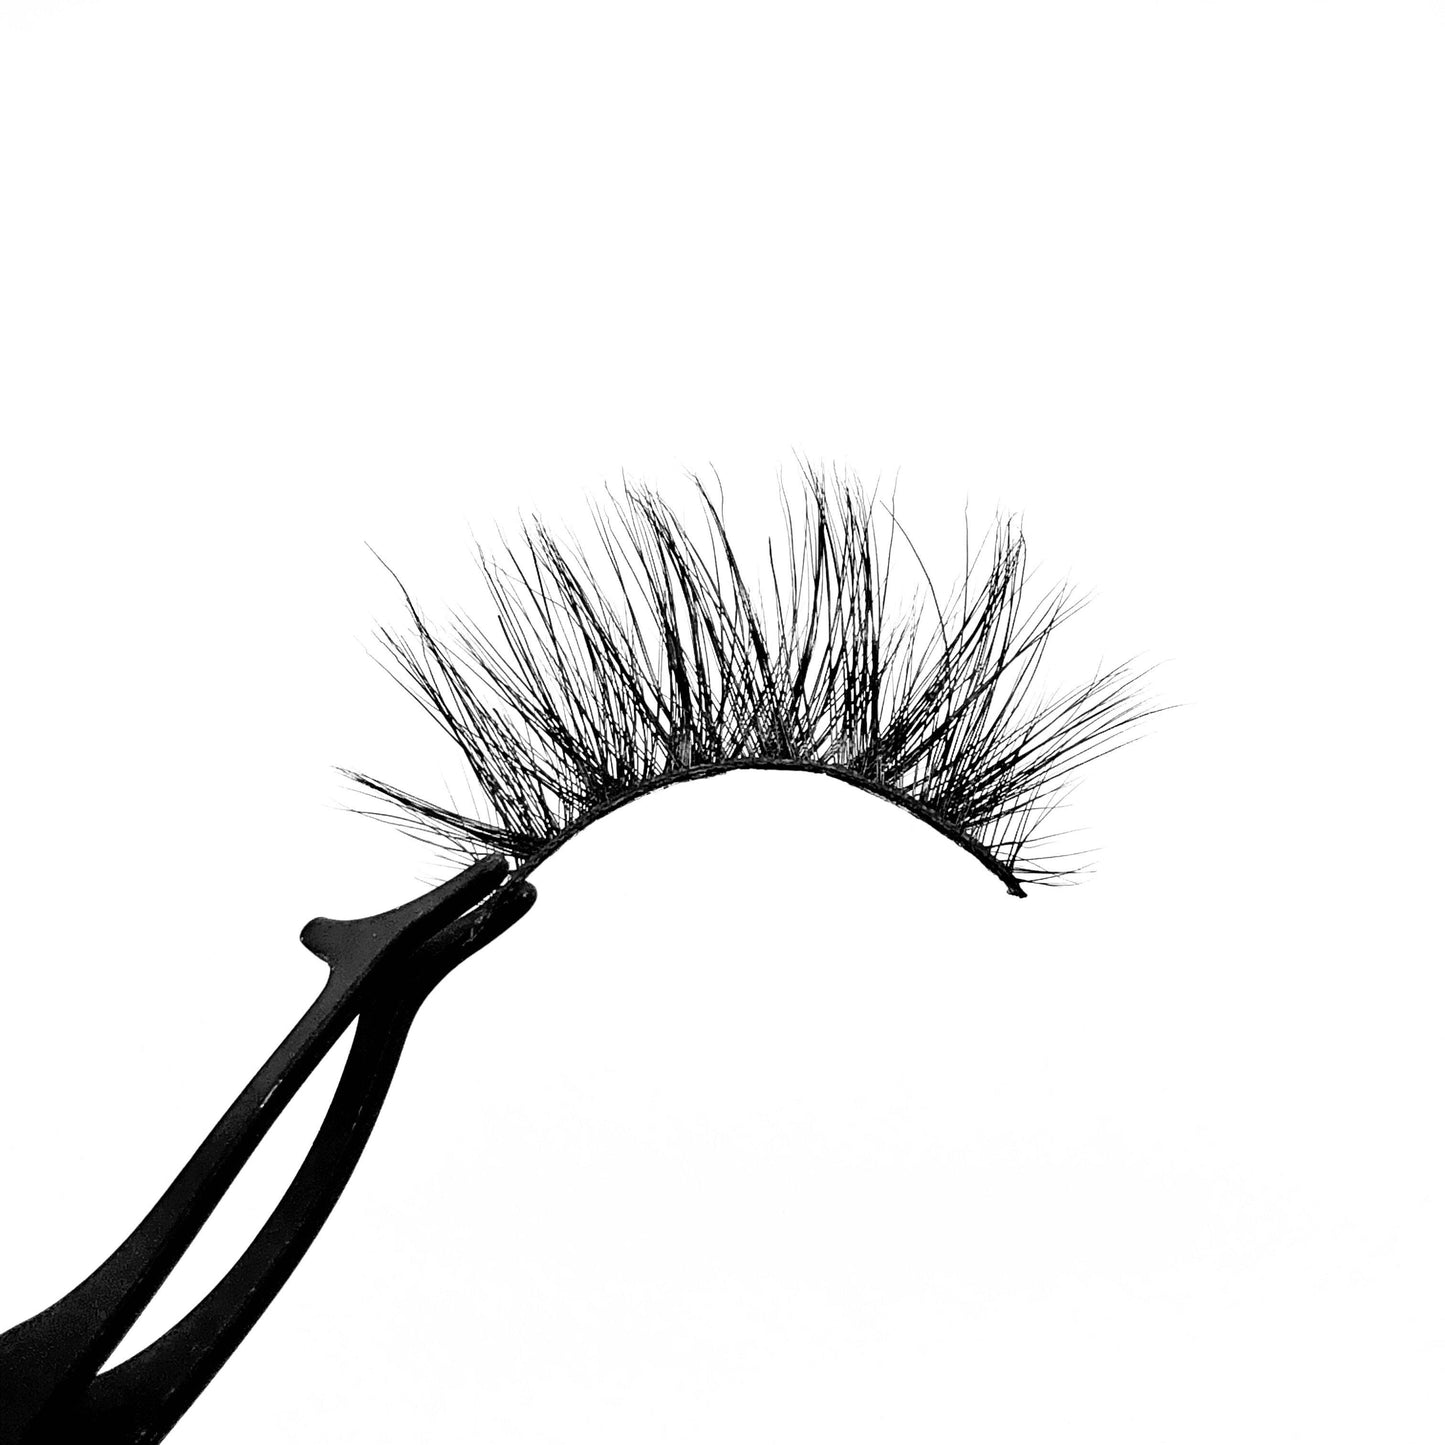 Goddess-High Volume-Our “Goddess” mink lashes feature an elongated crisscross pattern that gives you a long, wispy look. These glamorous lashes have longer hairs in center and shorter hairs on the corners for an open-eye effect. Description Handmade, Cruelty-Free, Wear up to 30x Material: 100% Mink Band: Black Cotton Band Volume: High Style: Wispy, Dramatic, Open-eye, Flirty To Use: Measure and size your lashes by placing the false lash against your lash line where your natural lashes start. Usi